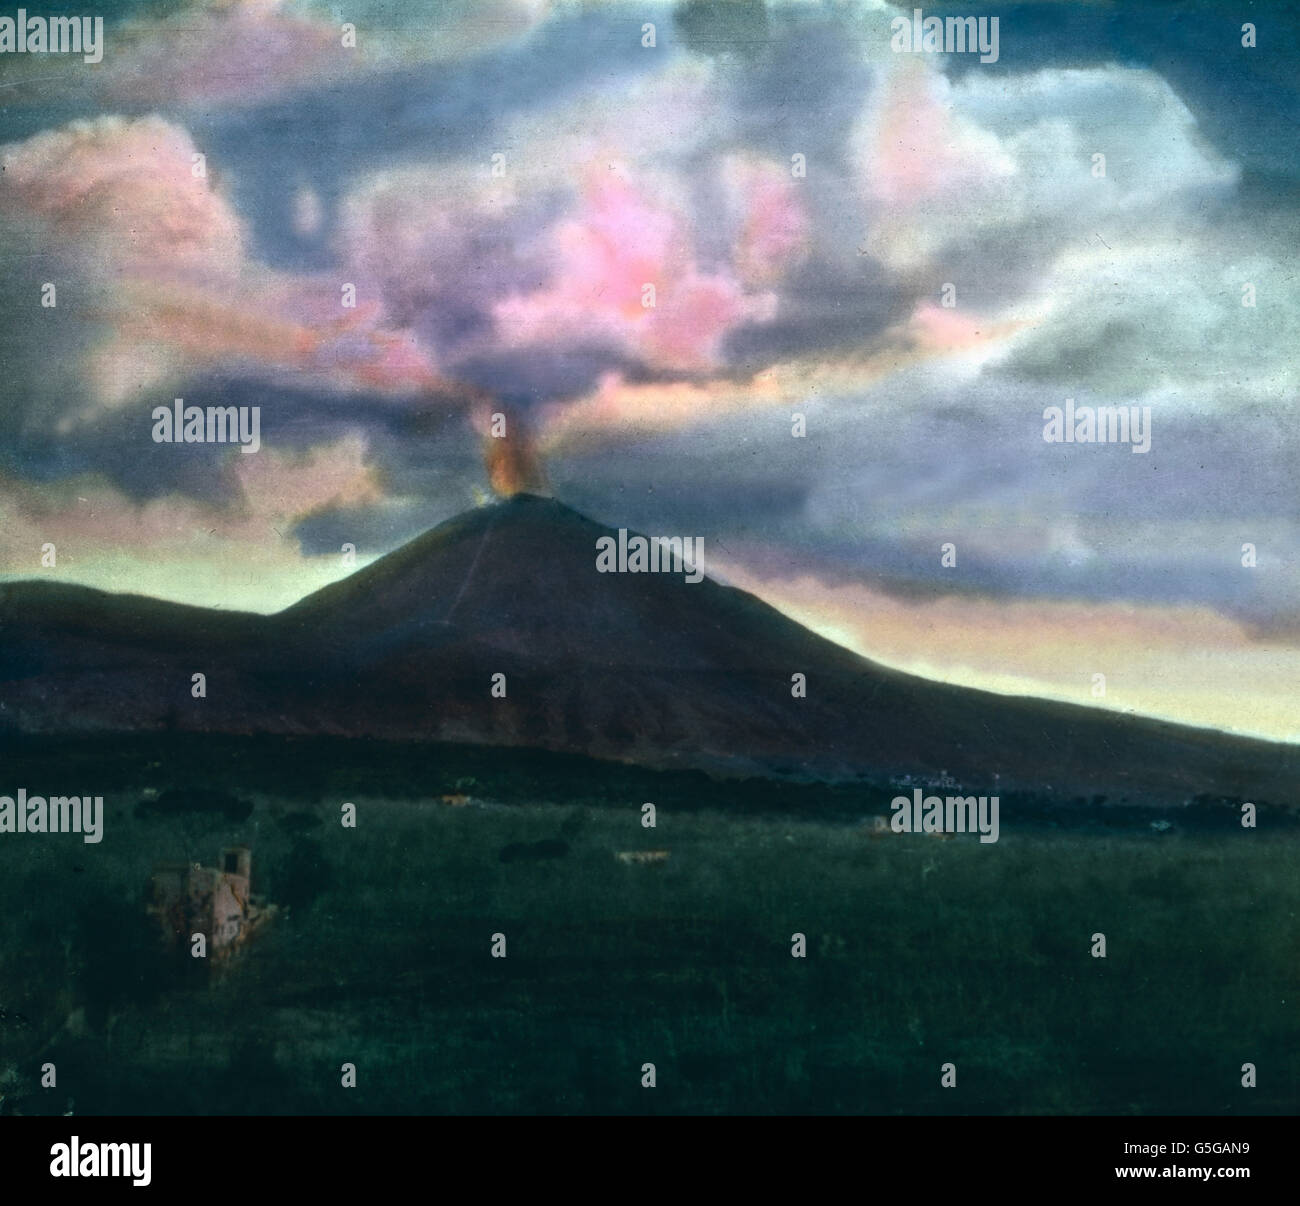 Wasserdämpfe aus einem Vulkan. Water vapors coming out of a volcano. illustration, mountain, volcano, cloud, erupting, eruption, volcanicity, volcanism, geology, history, historical, 1910s, 1920s, 20th century, archive, Carl Simon, hand-coloured glass slide Stock Photo